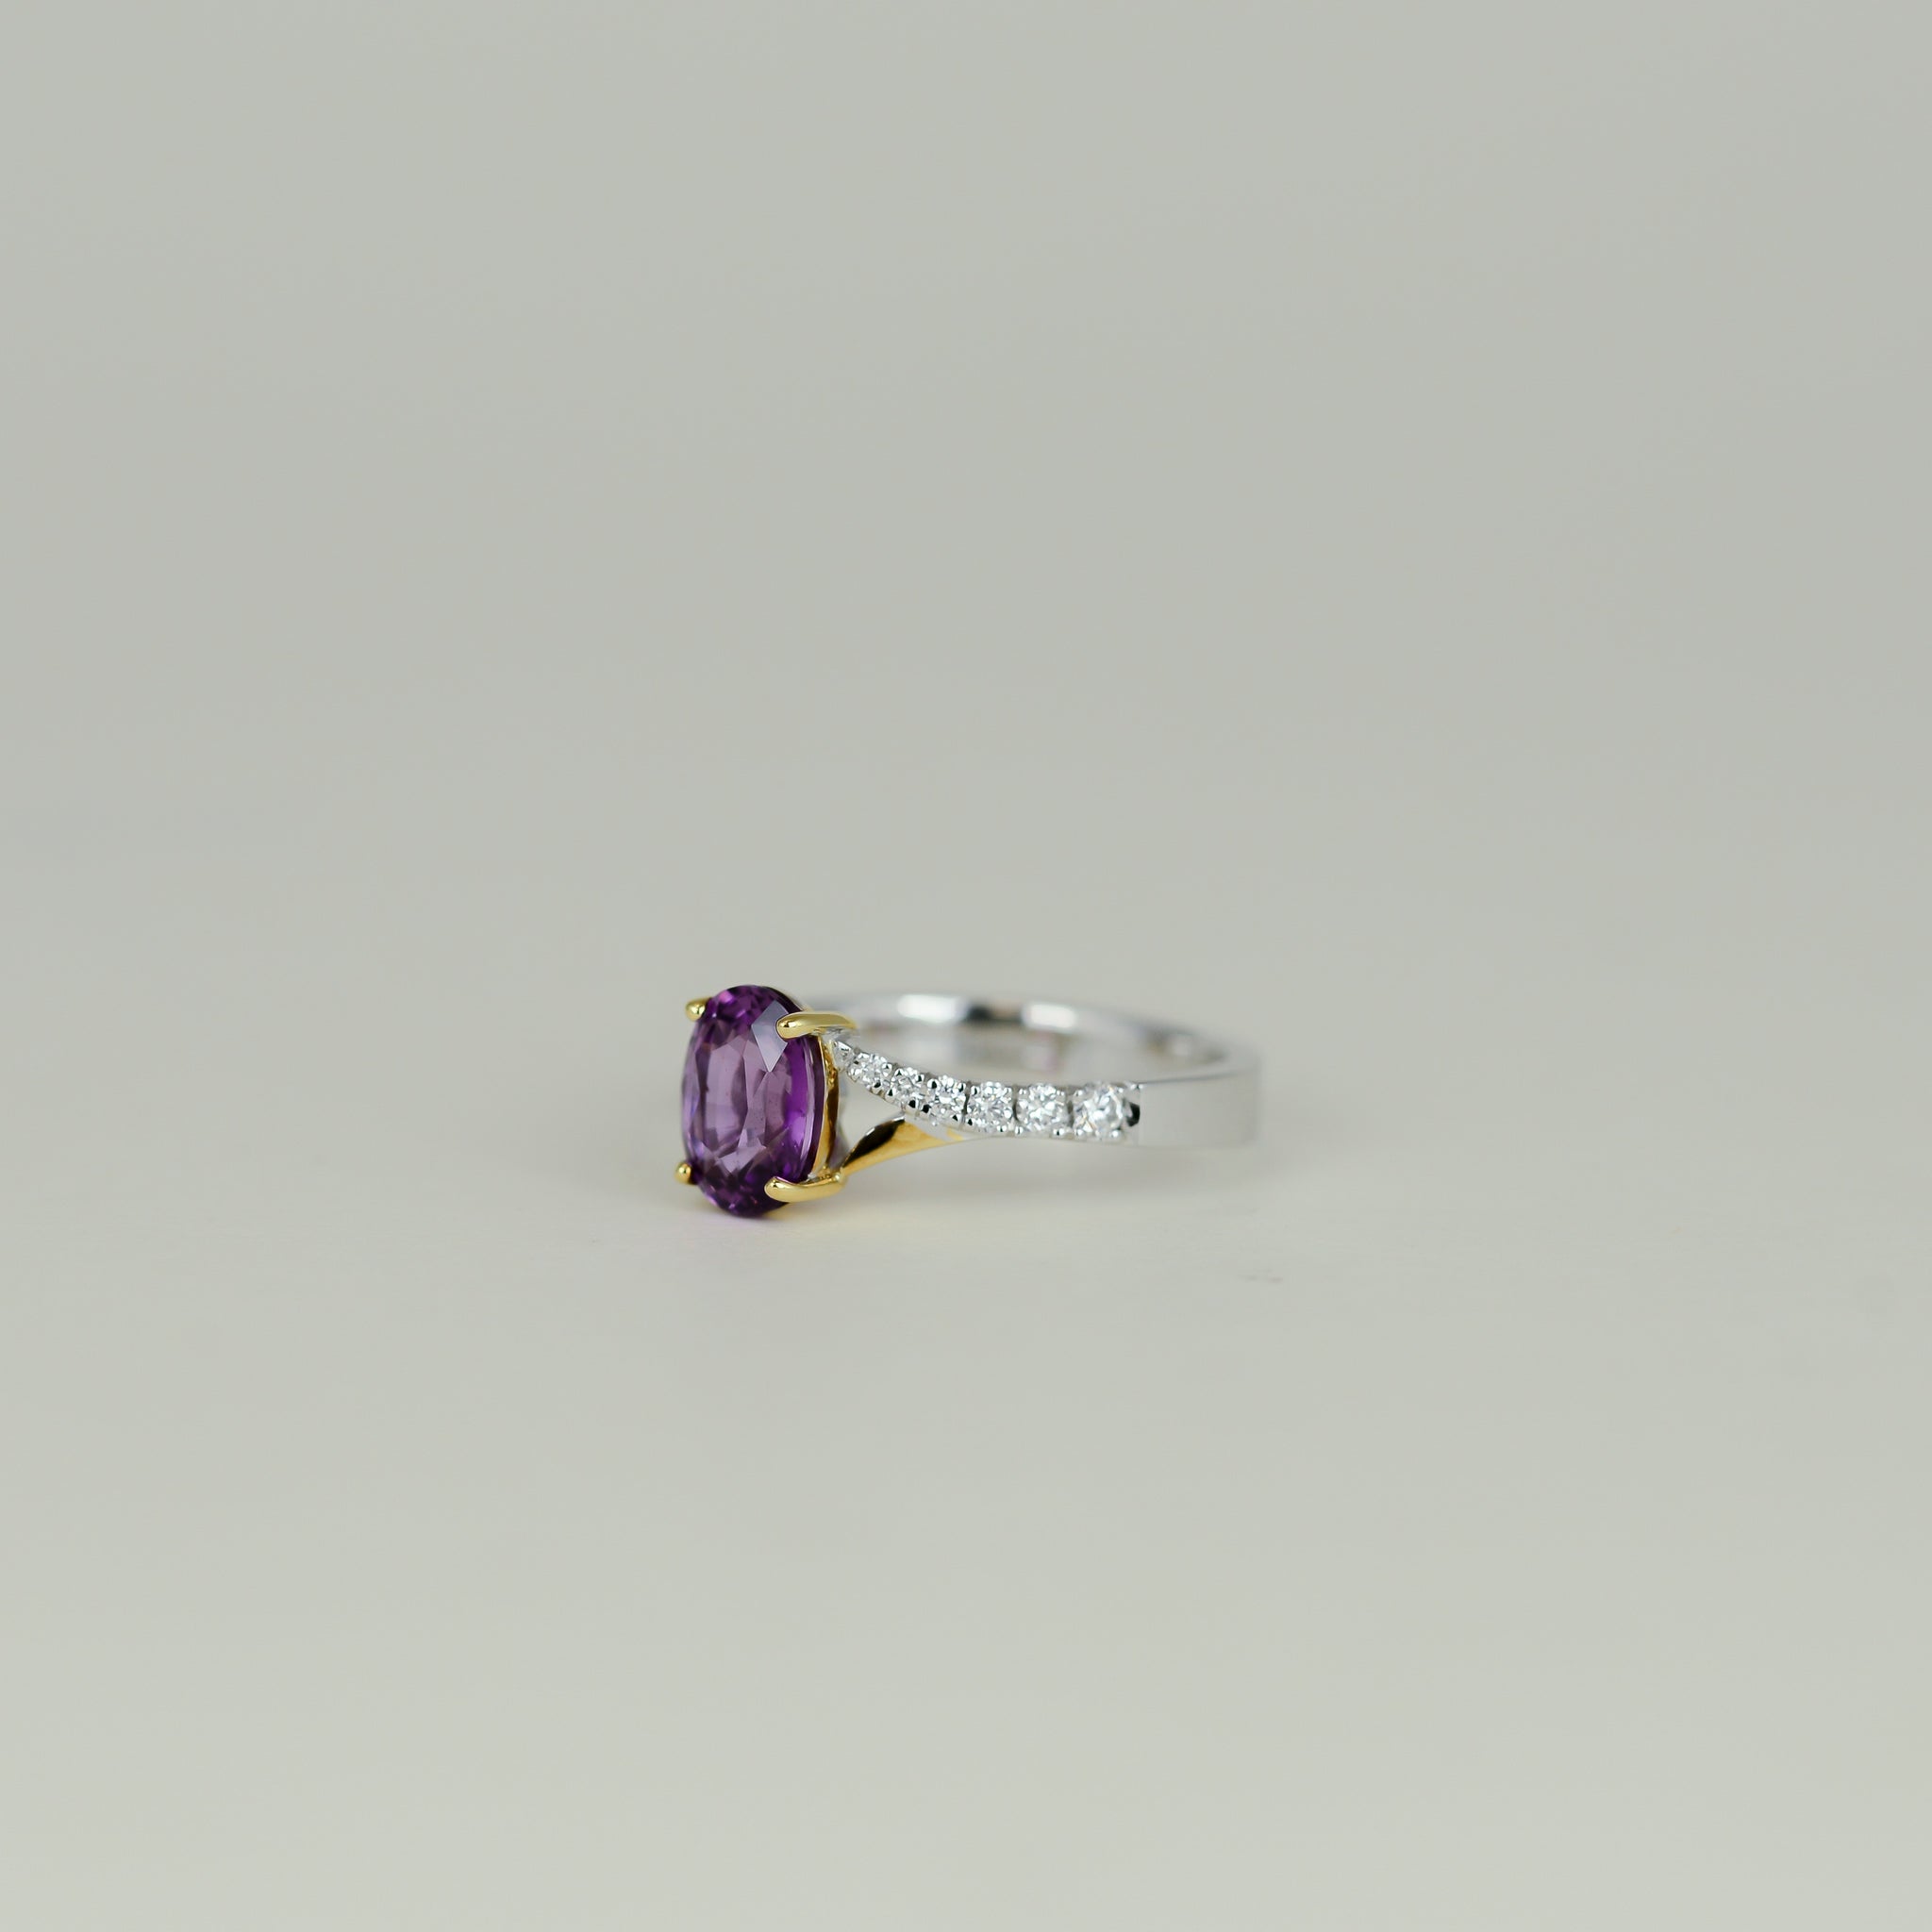 18ct Yellow and White Gold 1.55ct Violet Sapphire Solitaire Ring